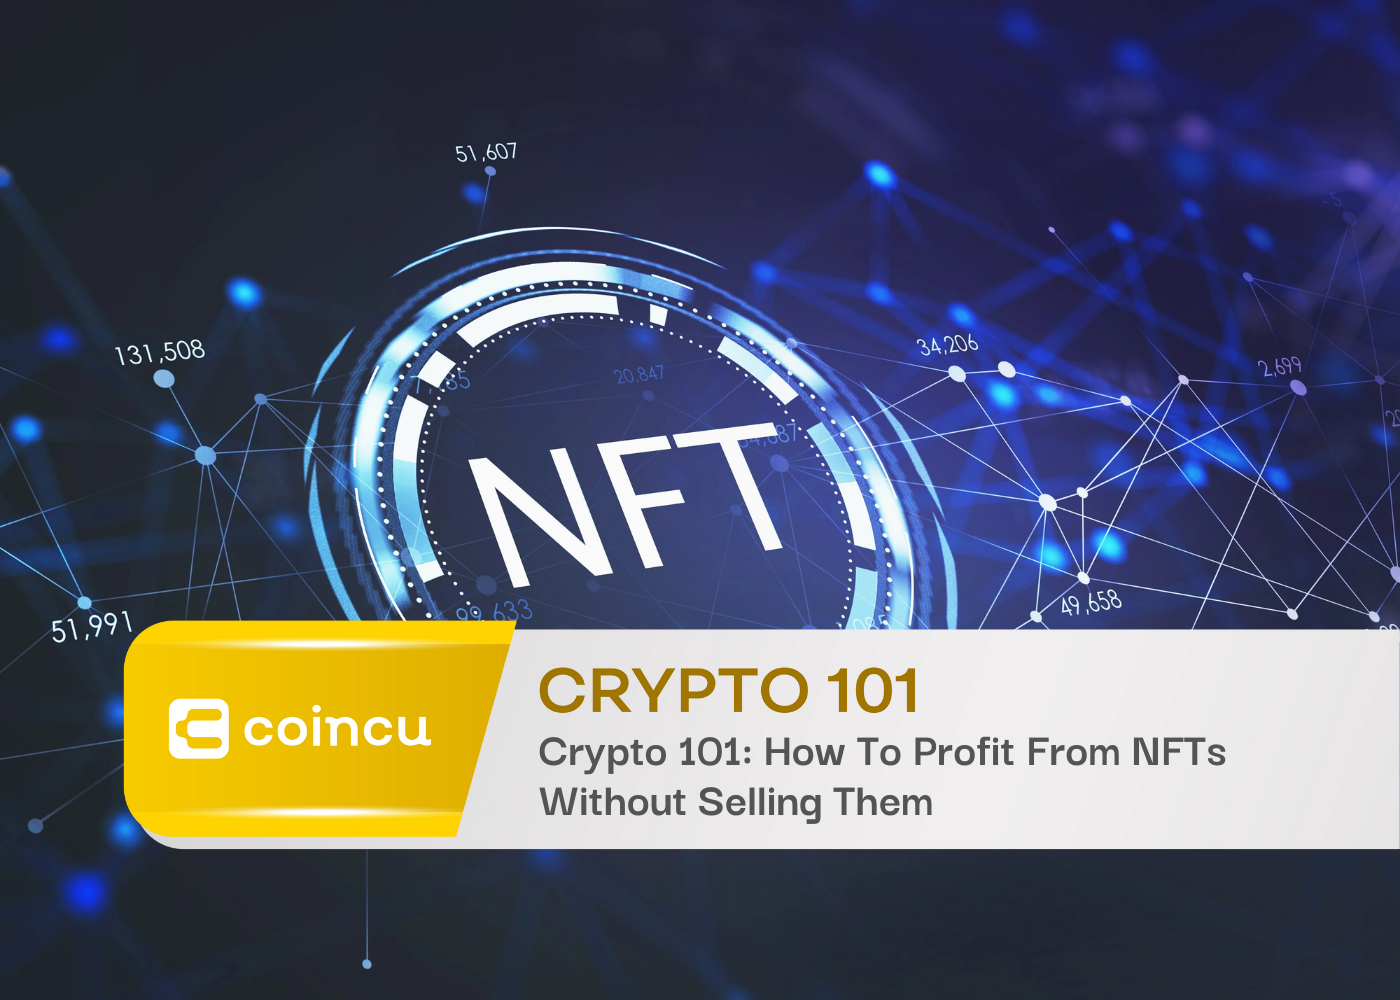 Crypto 101: How To Profit From NFTs Without Selling ThemCrypto 101: How To Profit From NFTs Without Selling Them